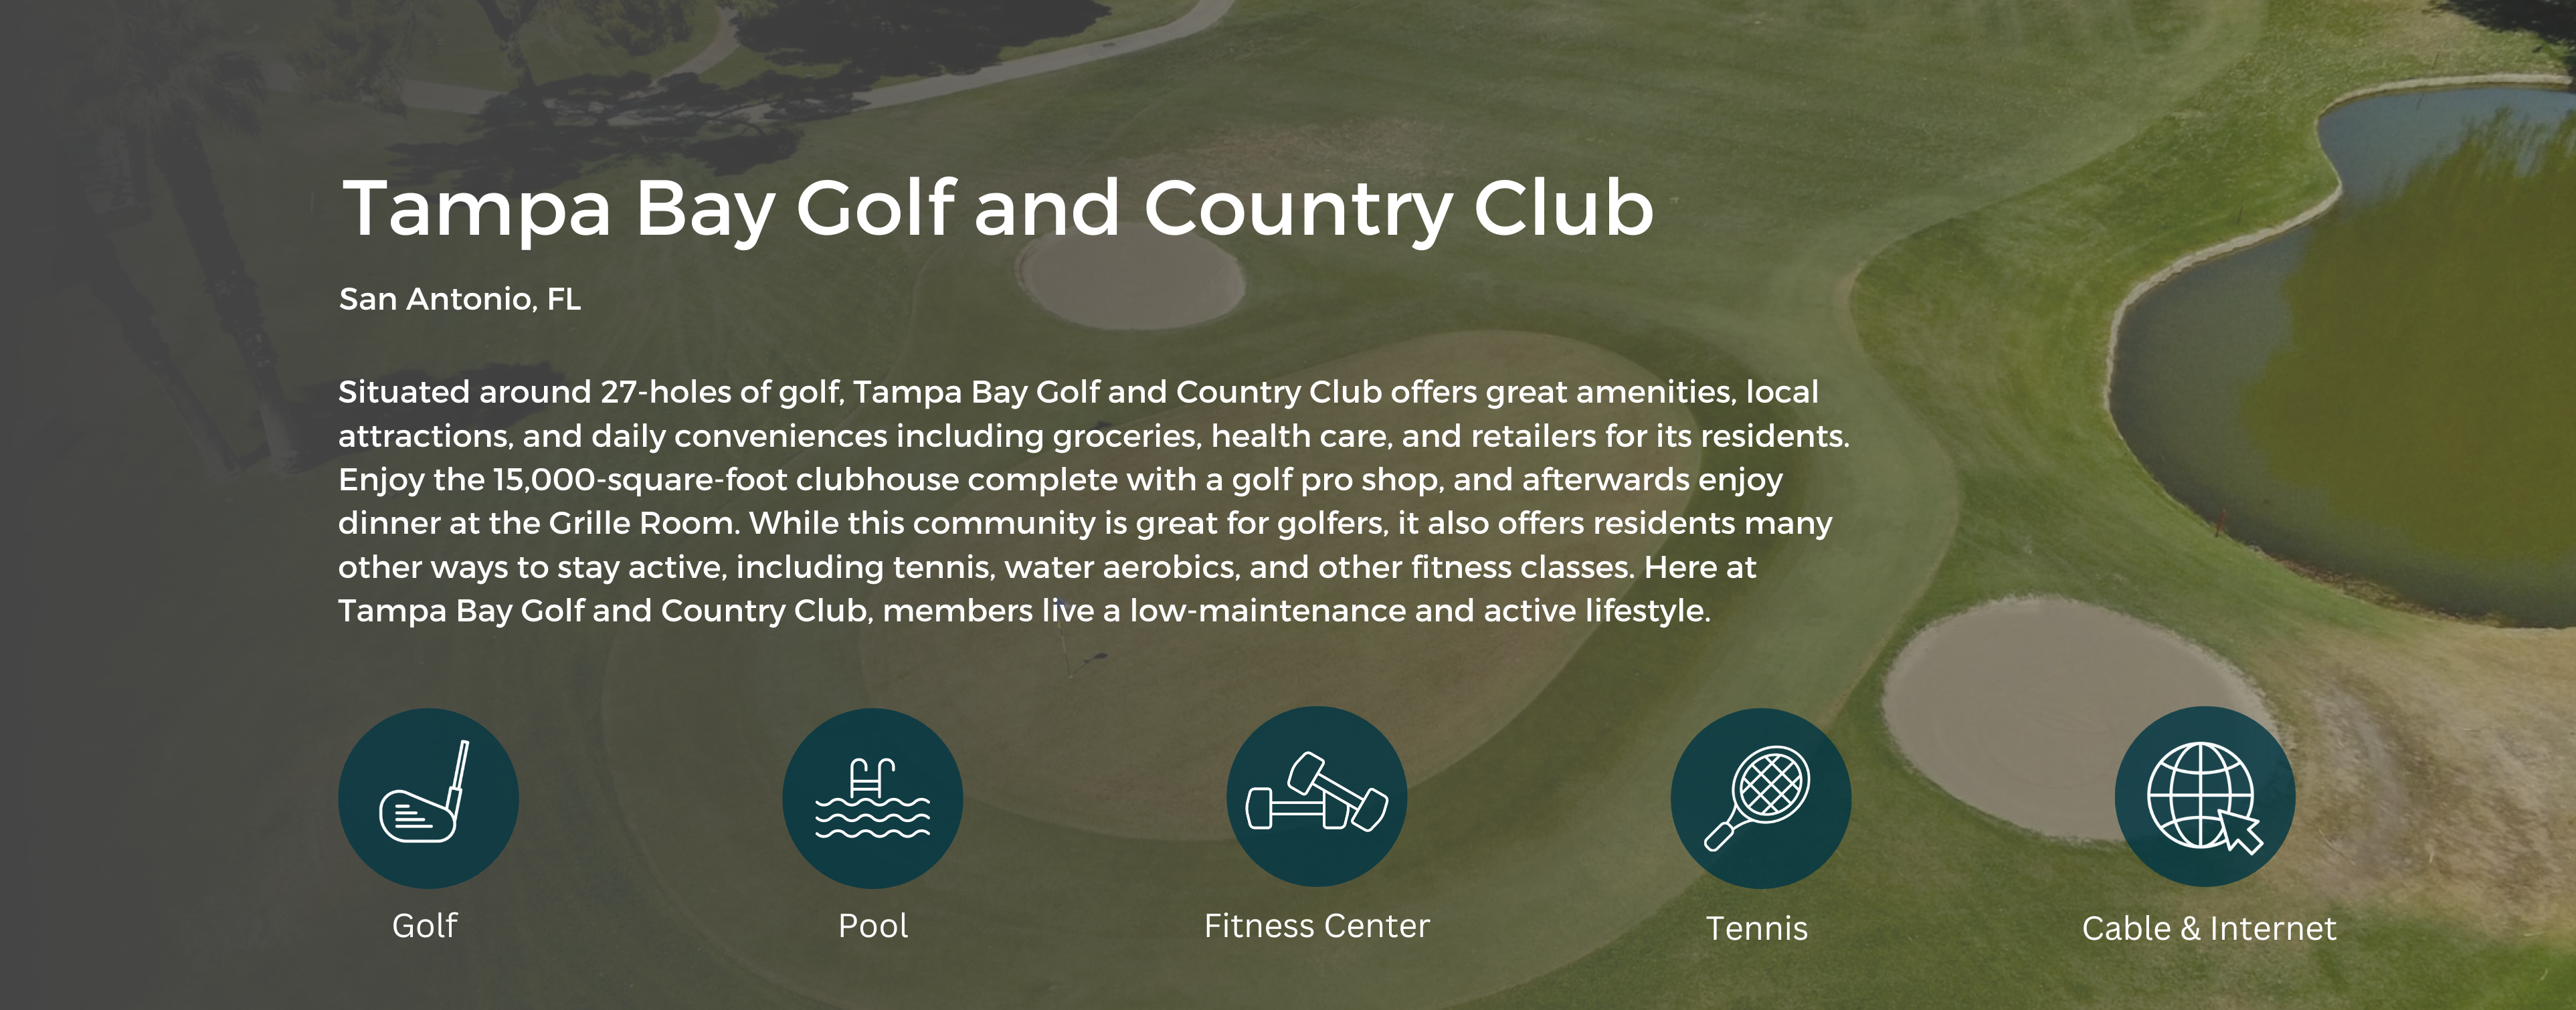 Icons showing Golf, Pool. Fitness Center, Tennis, and Wifi. Background image is a golf course.